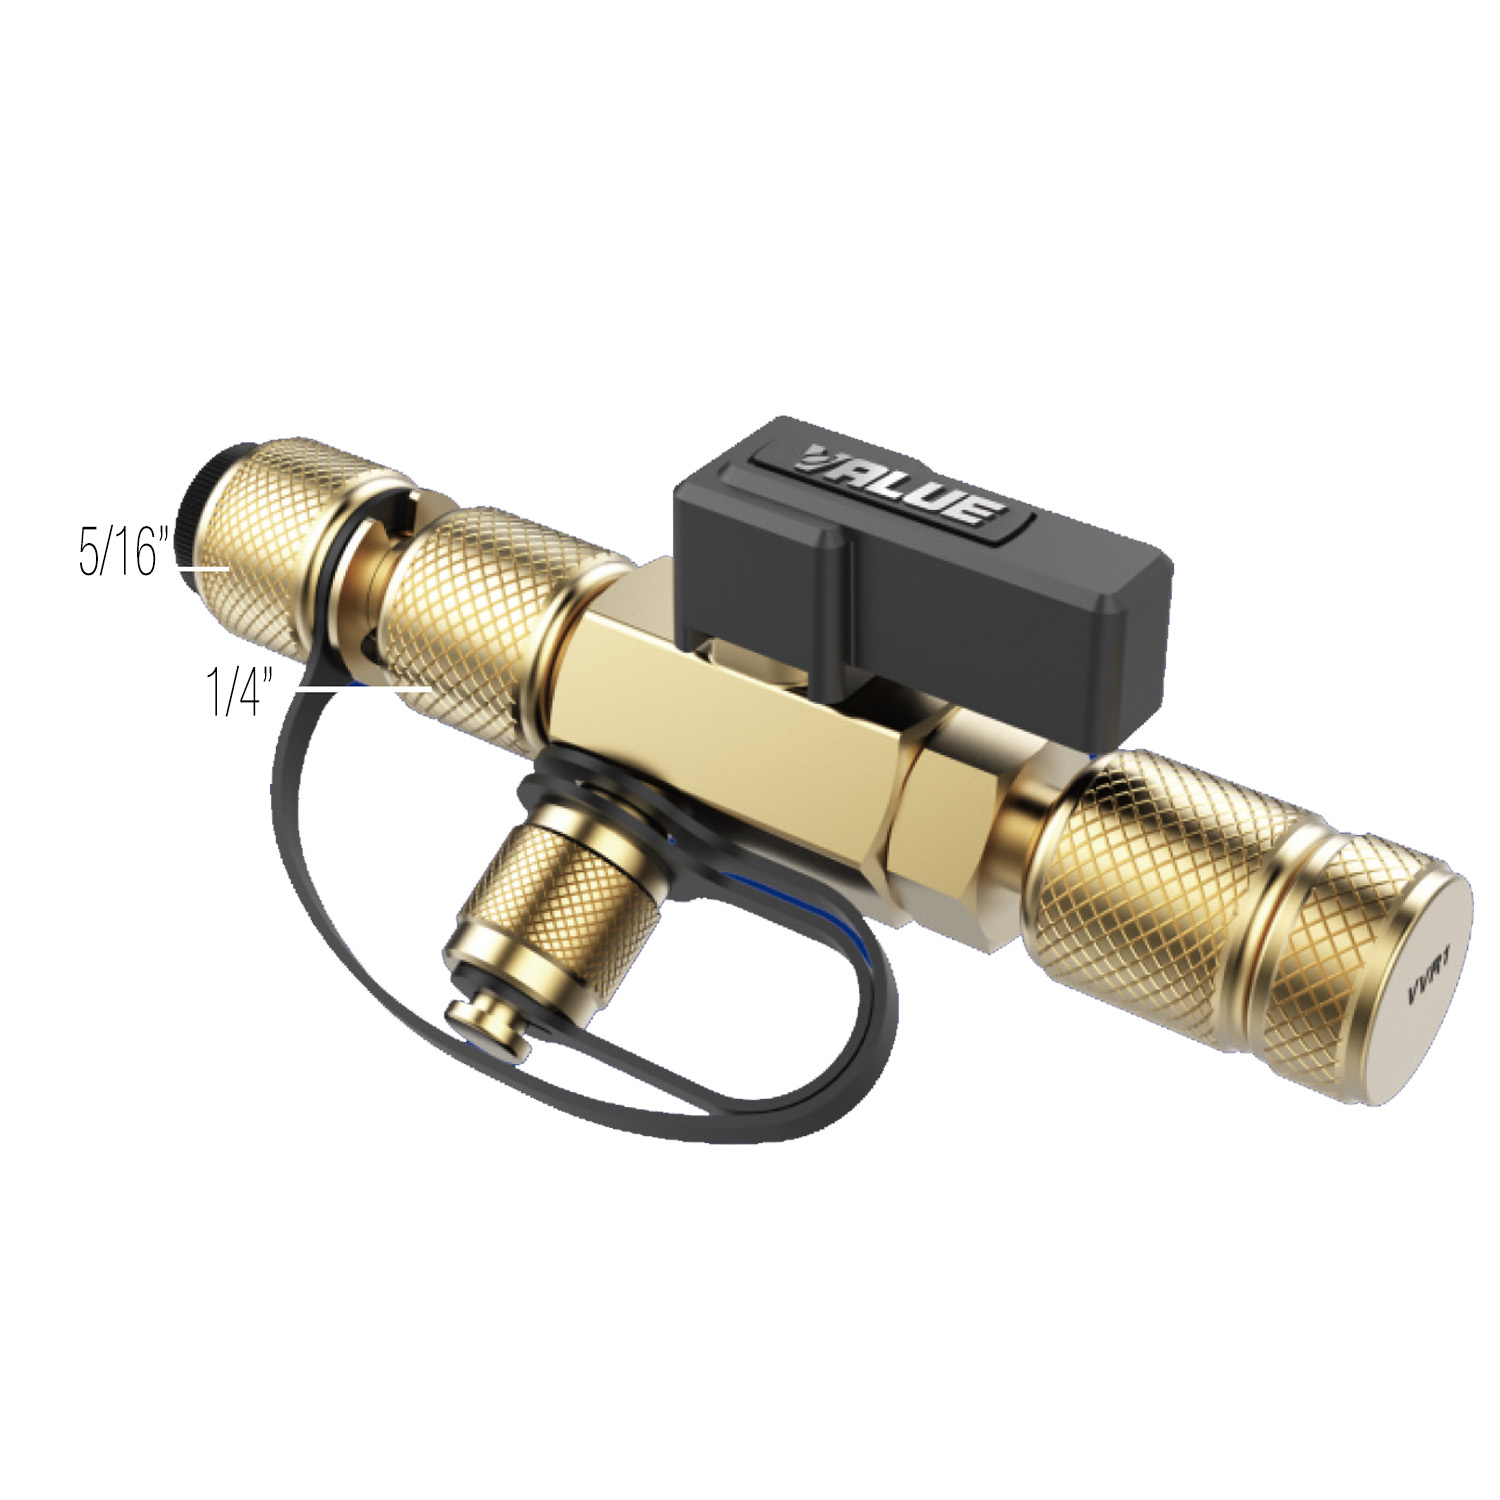 Schrader Valve core remover Value VCR1 (suitable for R410A, R32 with connections 5/16 and ¼)